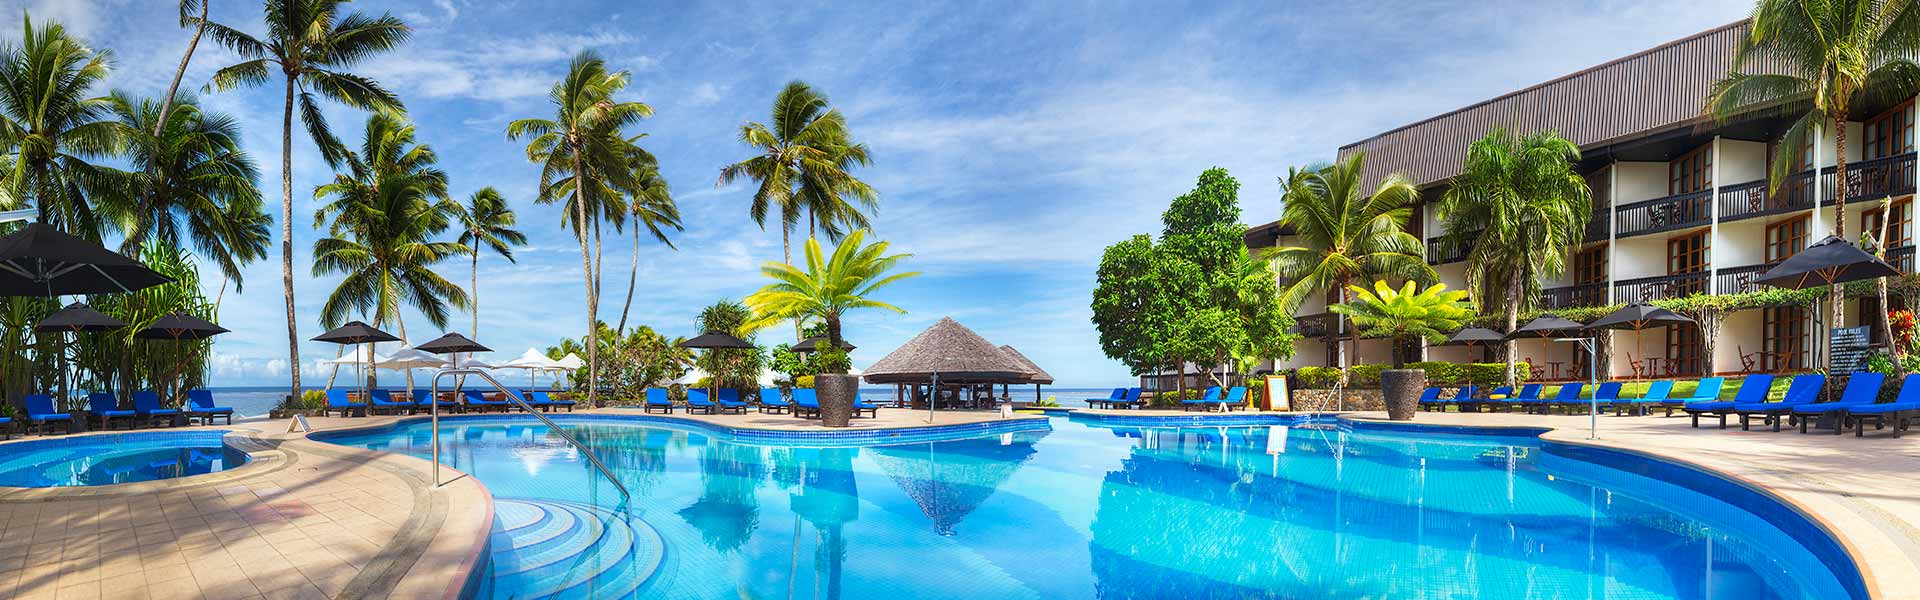 Bula Bubble: 5 Nights with All Meals & Unlimited Drinks